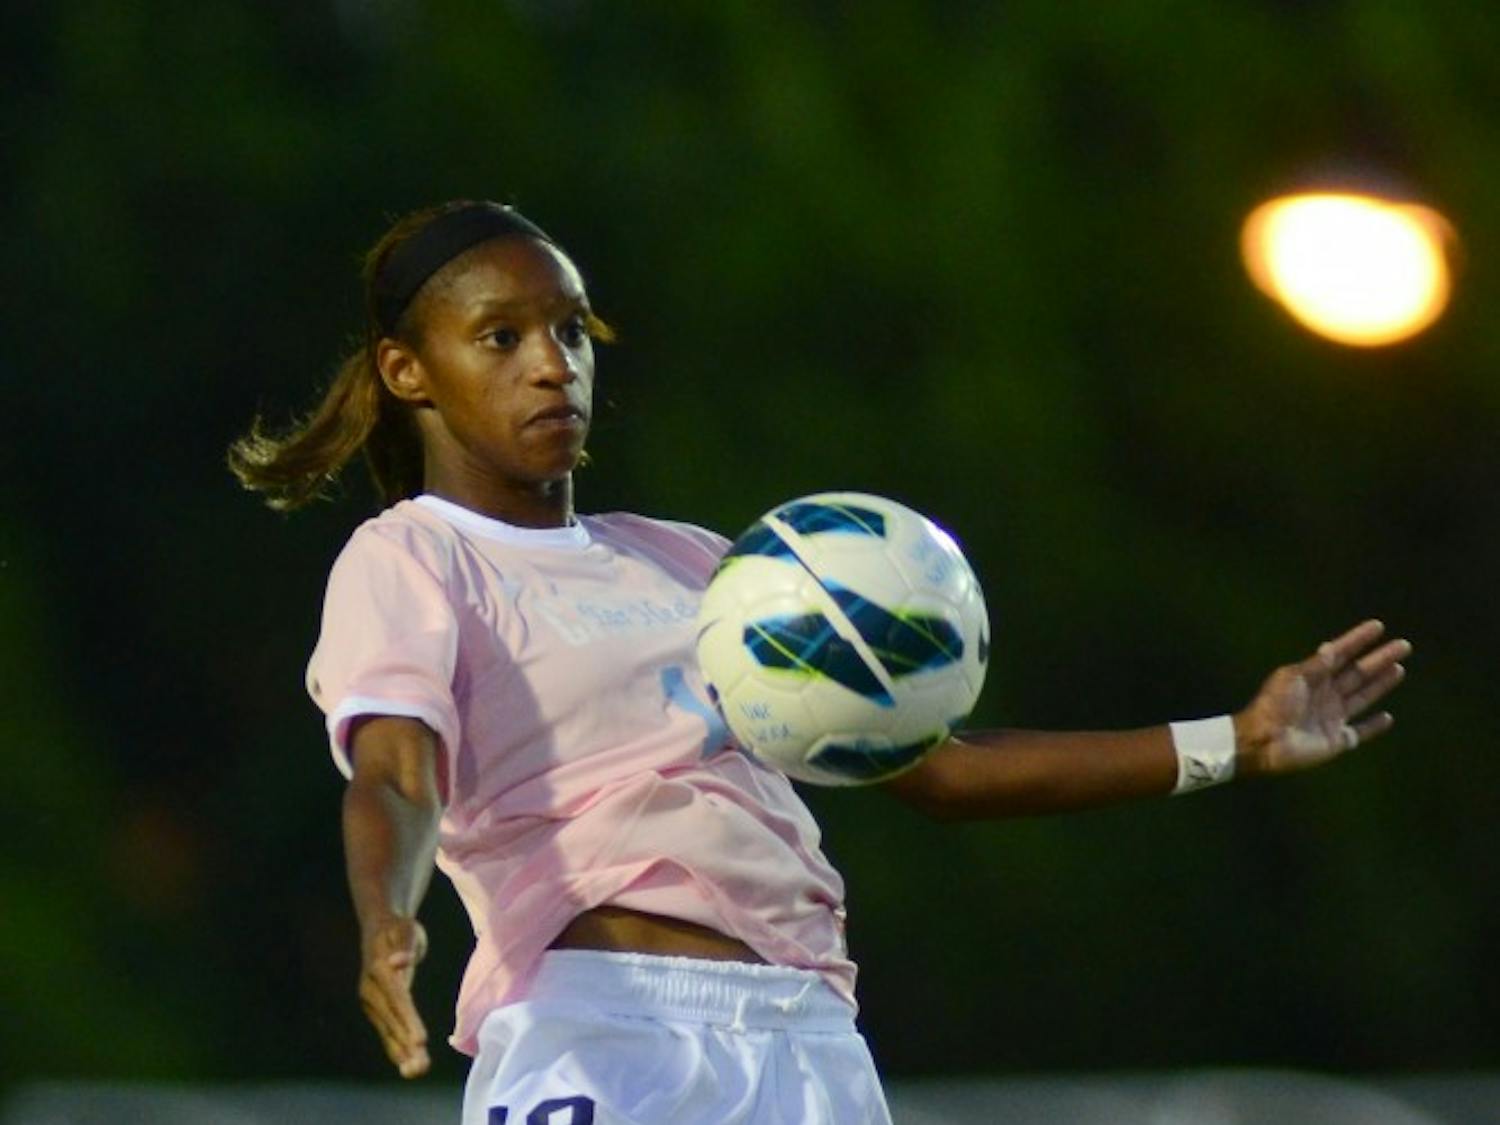 	UNC Women&#8217;s Soccer lost 1-0 to Florida State on September 27th, 2012 at Fetzer Field in Chapel Hill, North Carolina. North Carolina wore pink jerseys in support of breast cancer awareness. UNC moves to 5-3-2 and will play Miami at 1 p.m. Sunday September 30th at Fetzer Field.